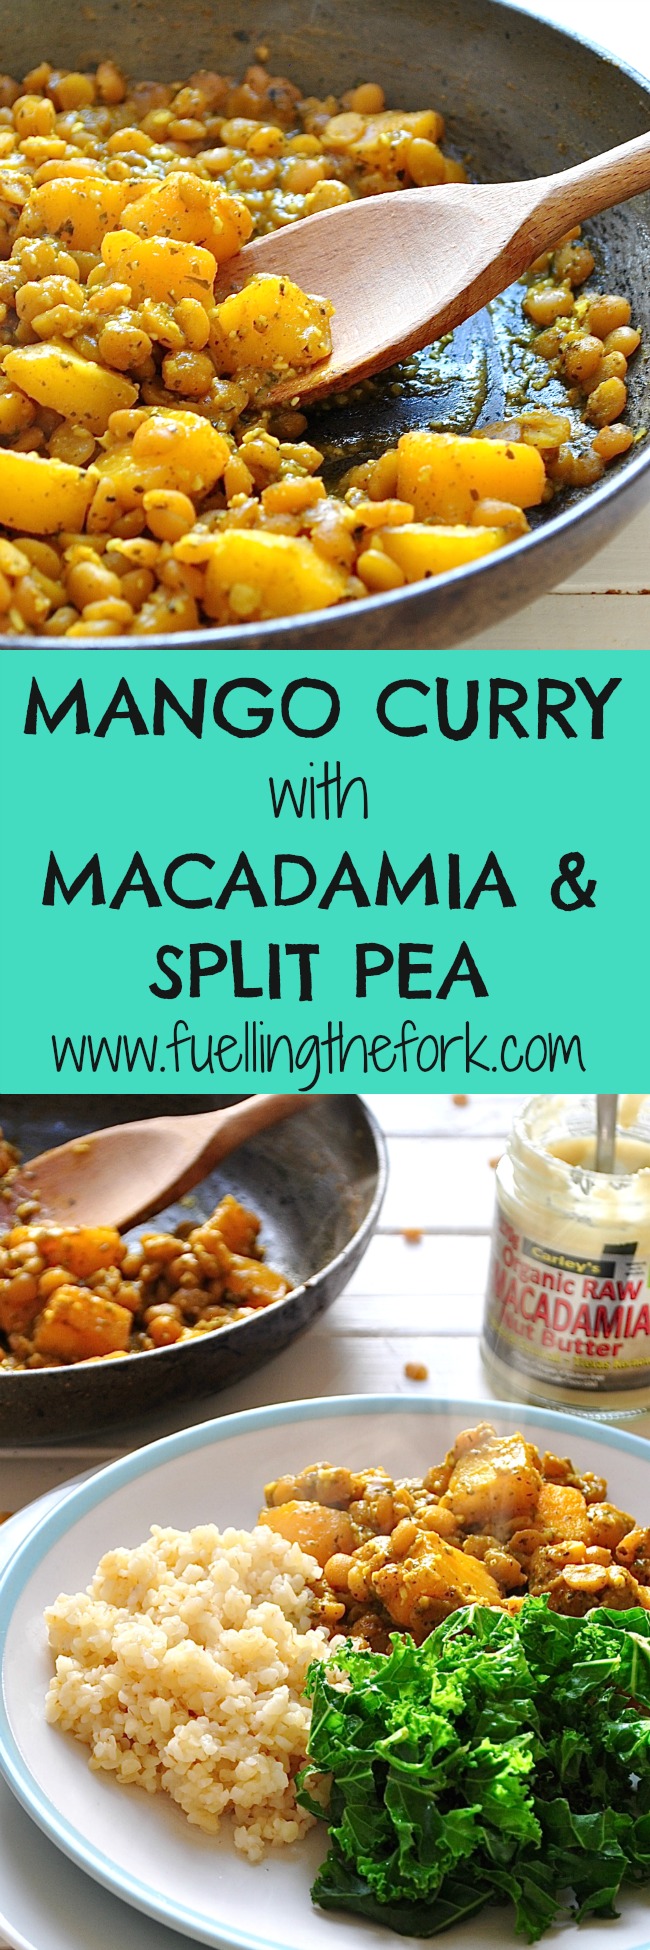 Mango Curry with Macadamia and Yellow Split Pea. This gorgeous vegan curry is fruity, creamy and comforting all at once. BONUS: its full of protein! Thanks, yellow split peas.